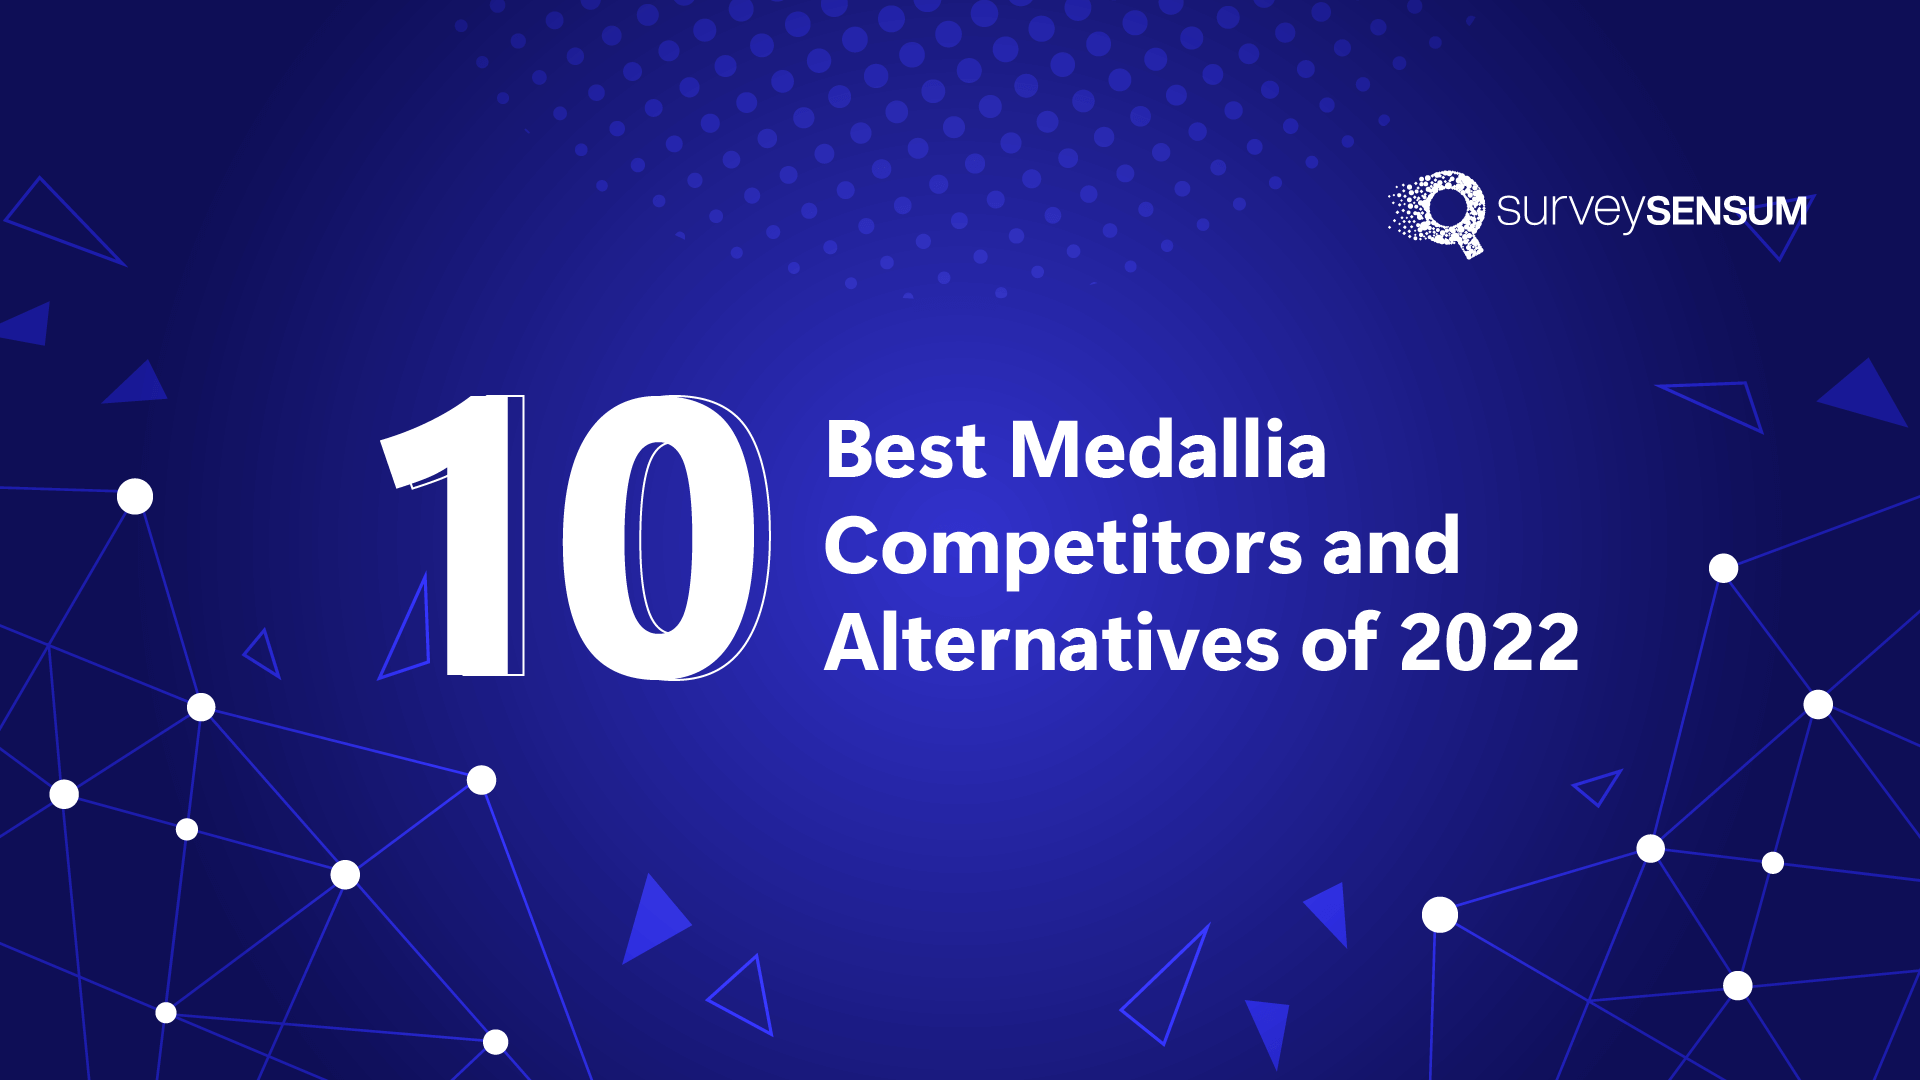 10 Best Medallia Competitors and Alternatives of 2022